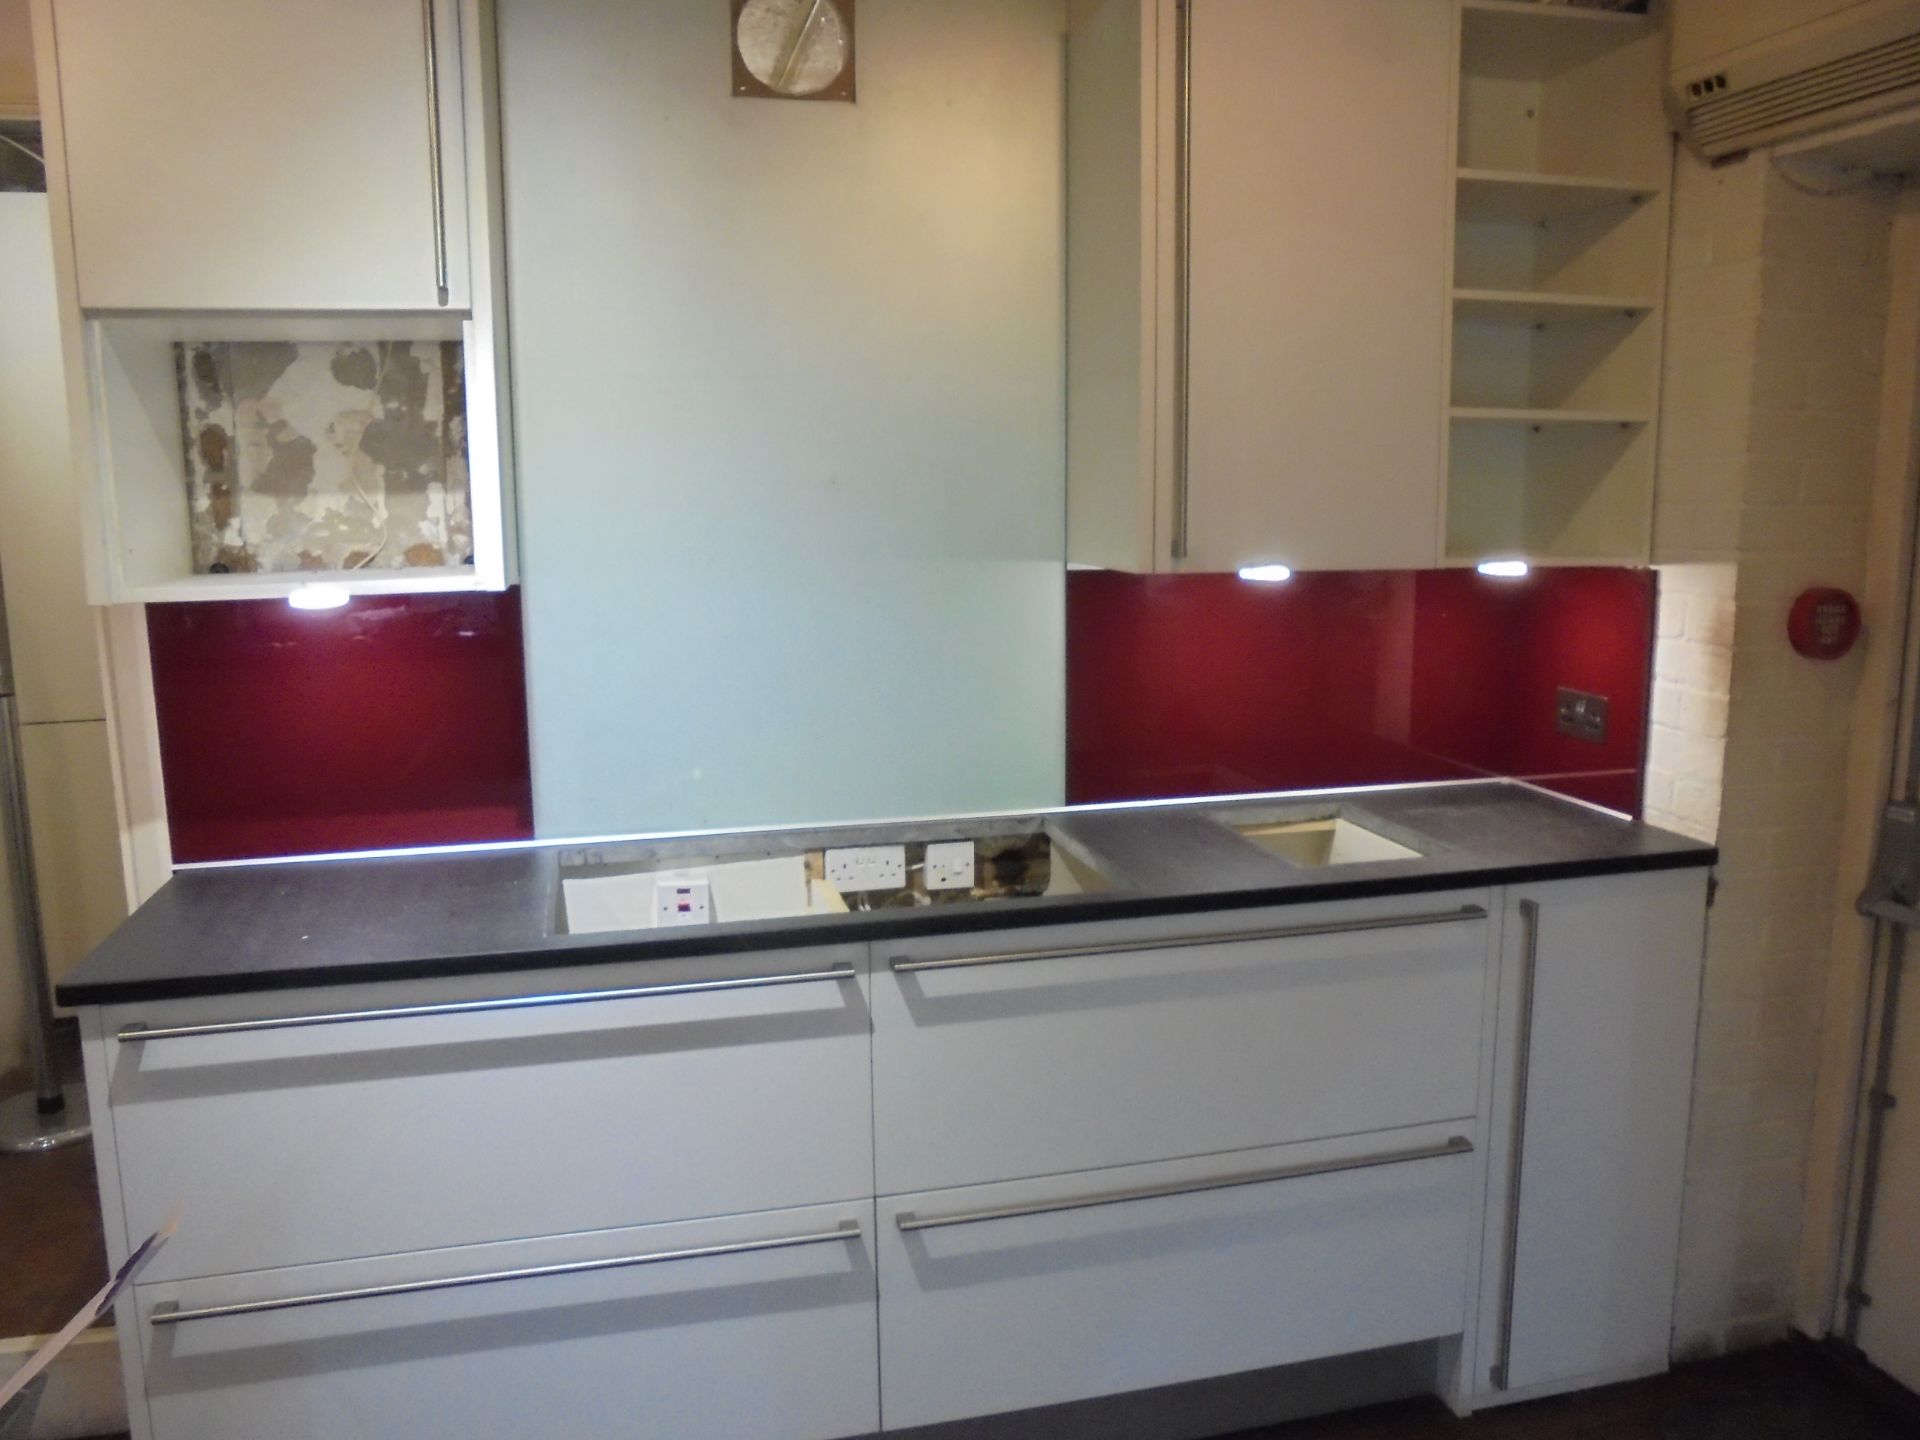 Hacker Kitchen Display in White. Consists of: 2 x 2 Deep Drawer 1000mm Base Units with End Panels, - Image 2 of 6